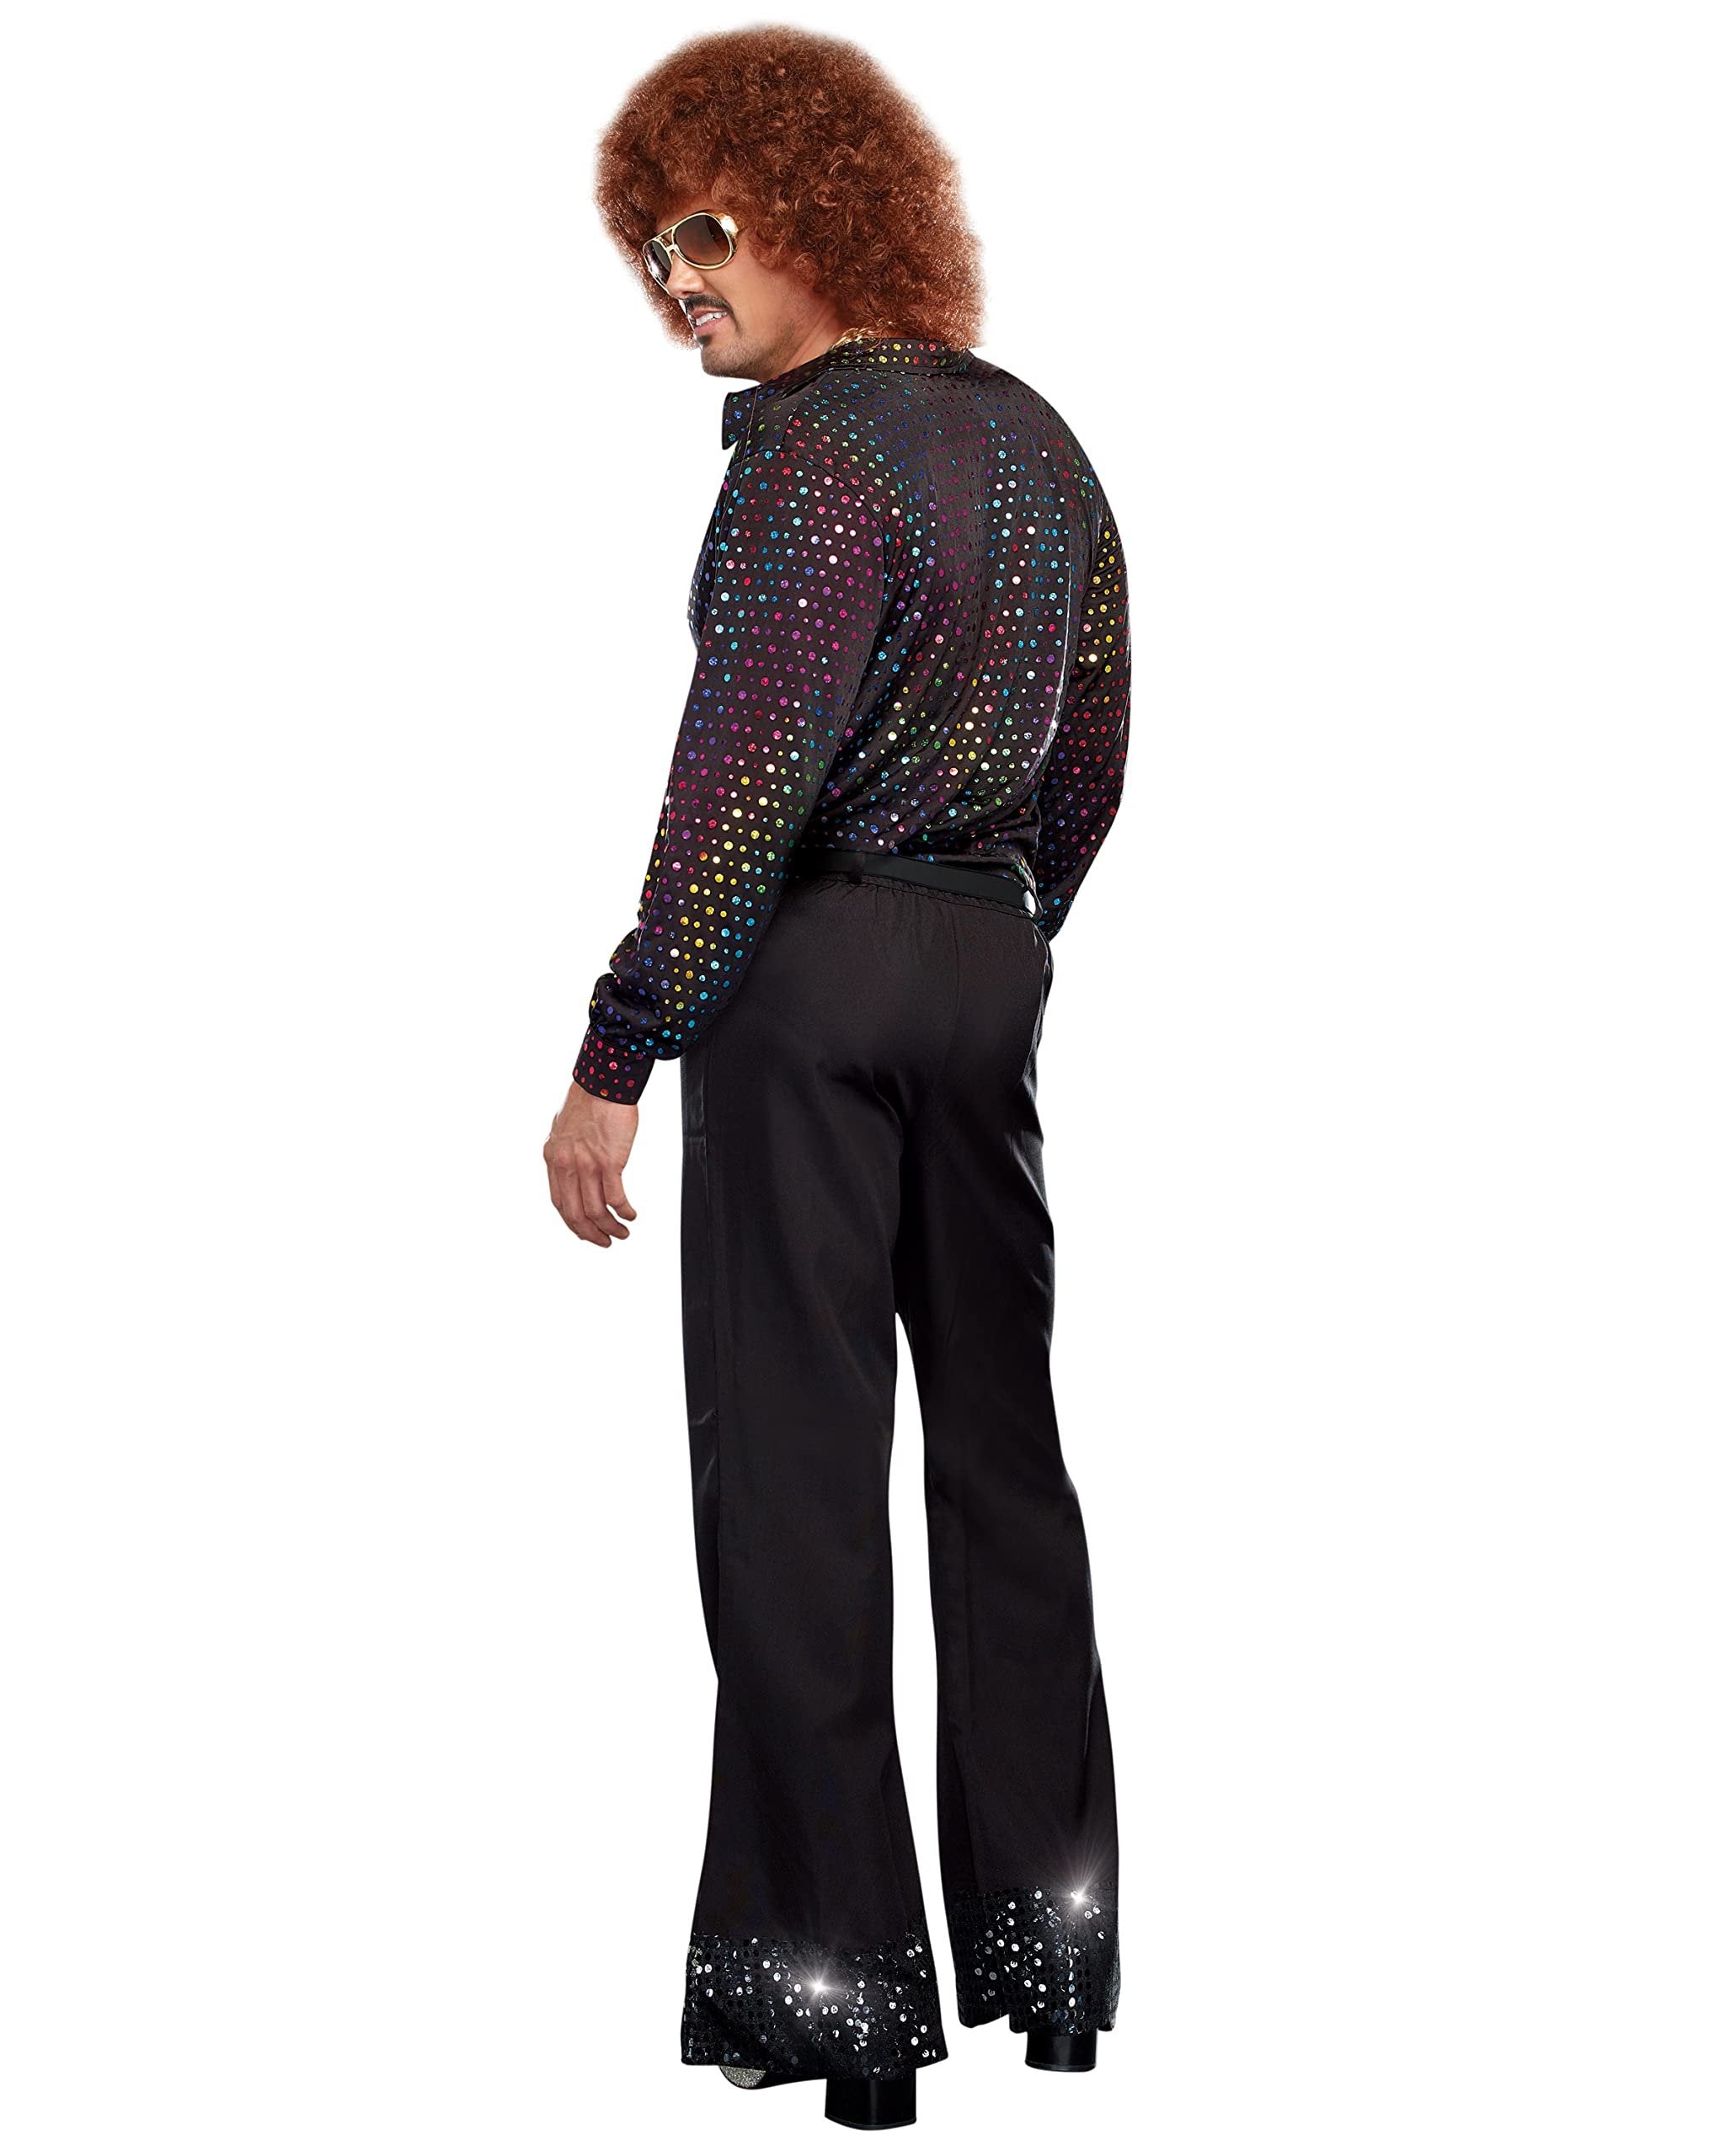 Disco Casual Pants for Men by Dreamgirl - Black, Medium-Large - Free Shipping & Returns